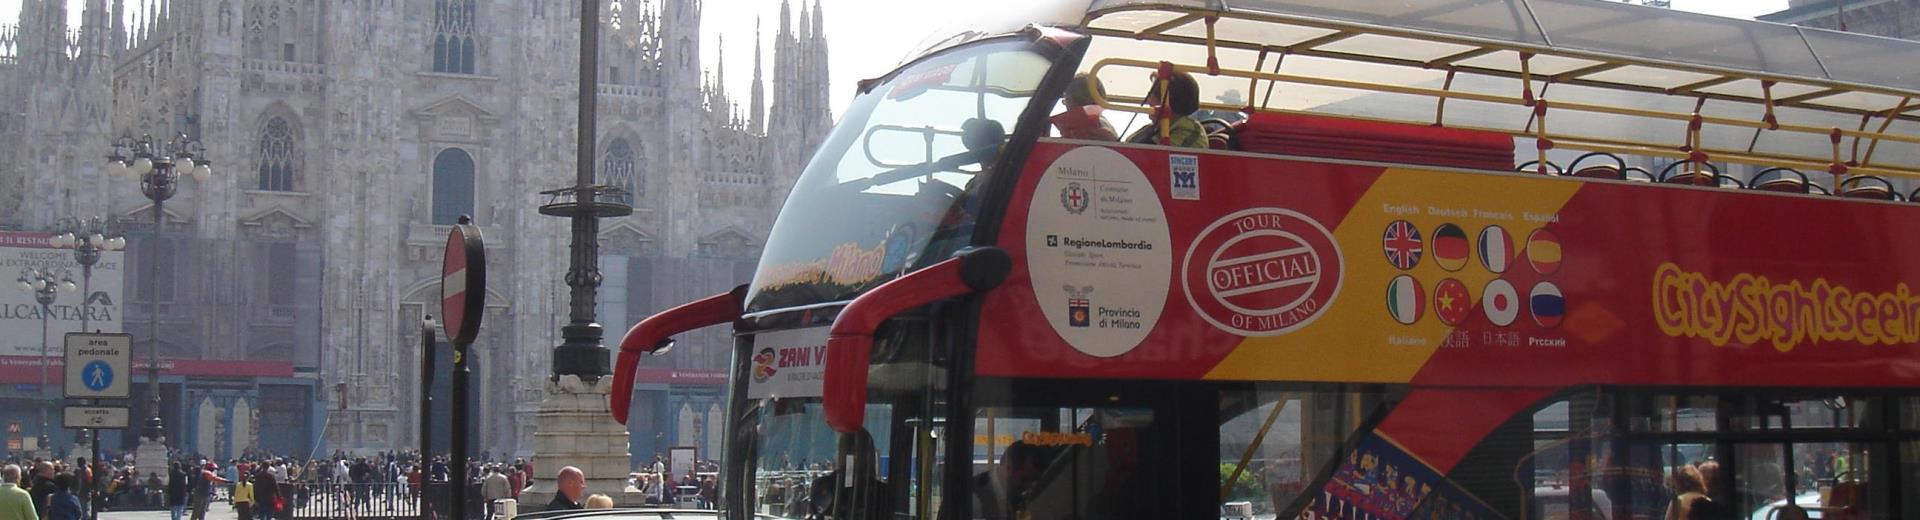 Bus panoramico in Piazza Duomo